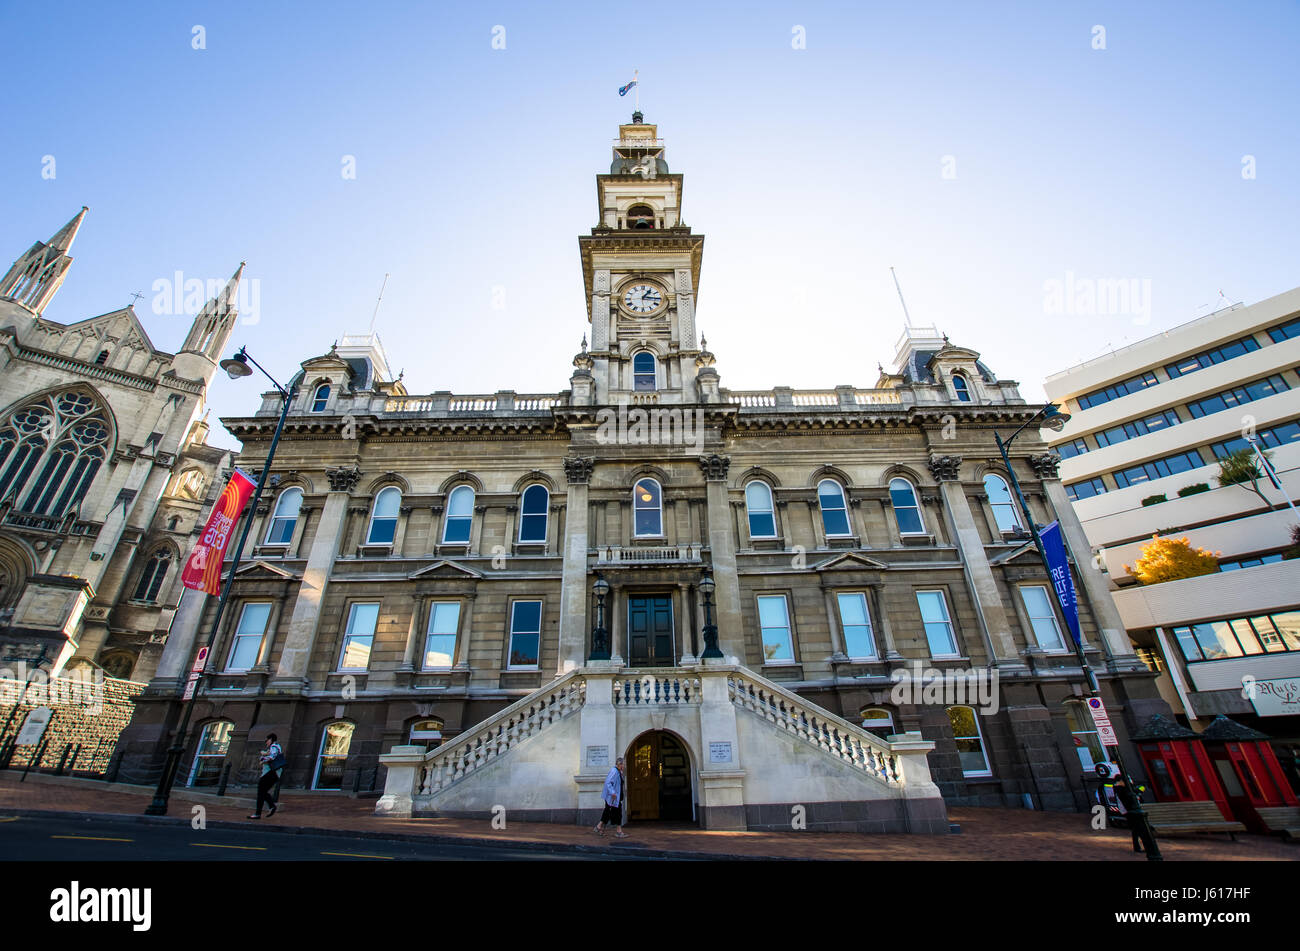 Dunedin,New Zealand - May 3,2016 : Dunedin Town Hall building is a municipal building in the city of Dunedin in New Zealand. Stock Photo